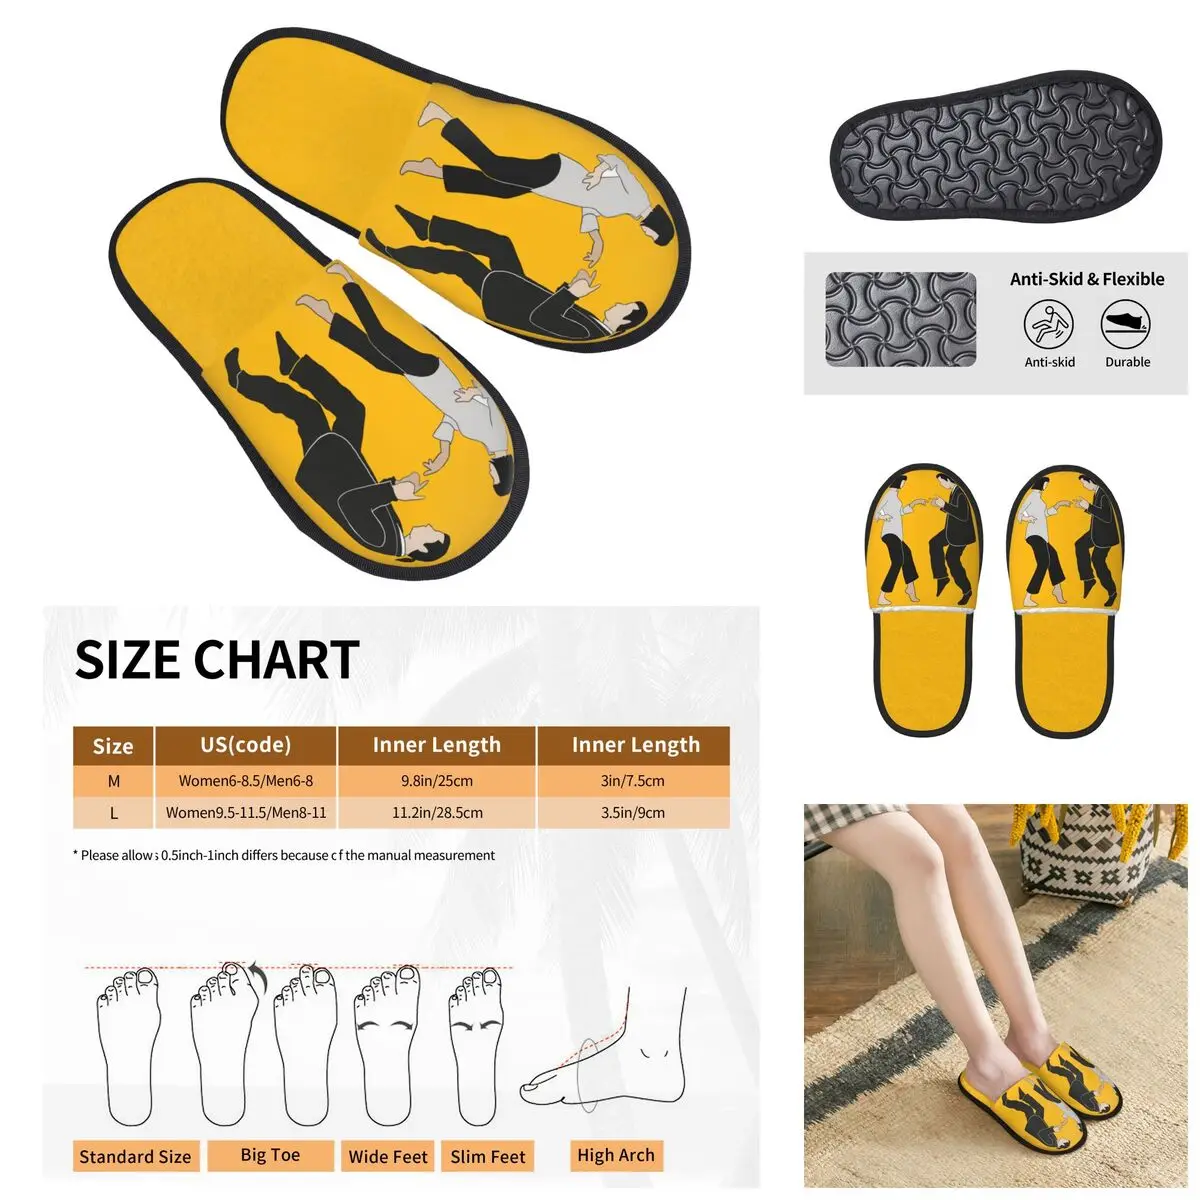 

Crazy Design Pulp Fiction Basketball Men Women Furry slippers,Cosy printing pantoufle homme Home slippers